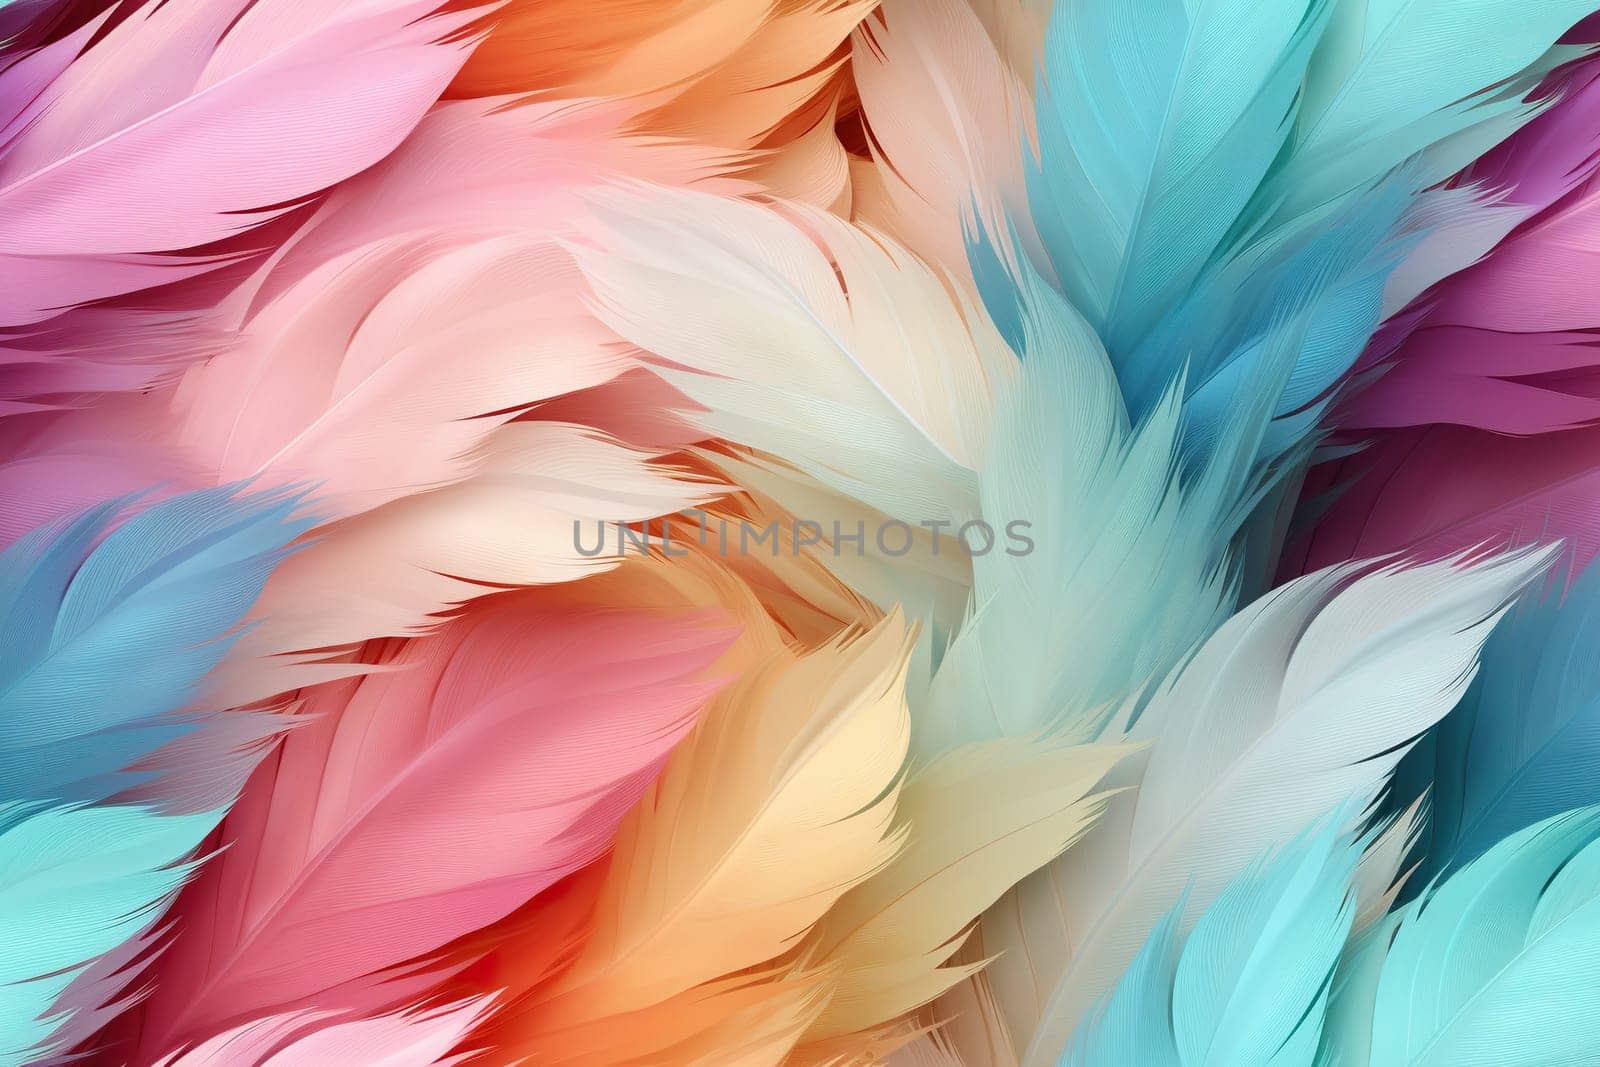 Colorful feathers, feather pattern in soft colors. Bright background.